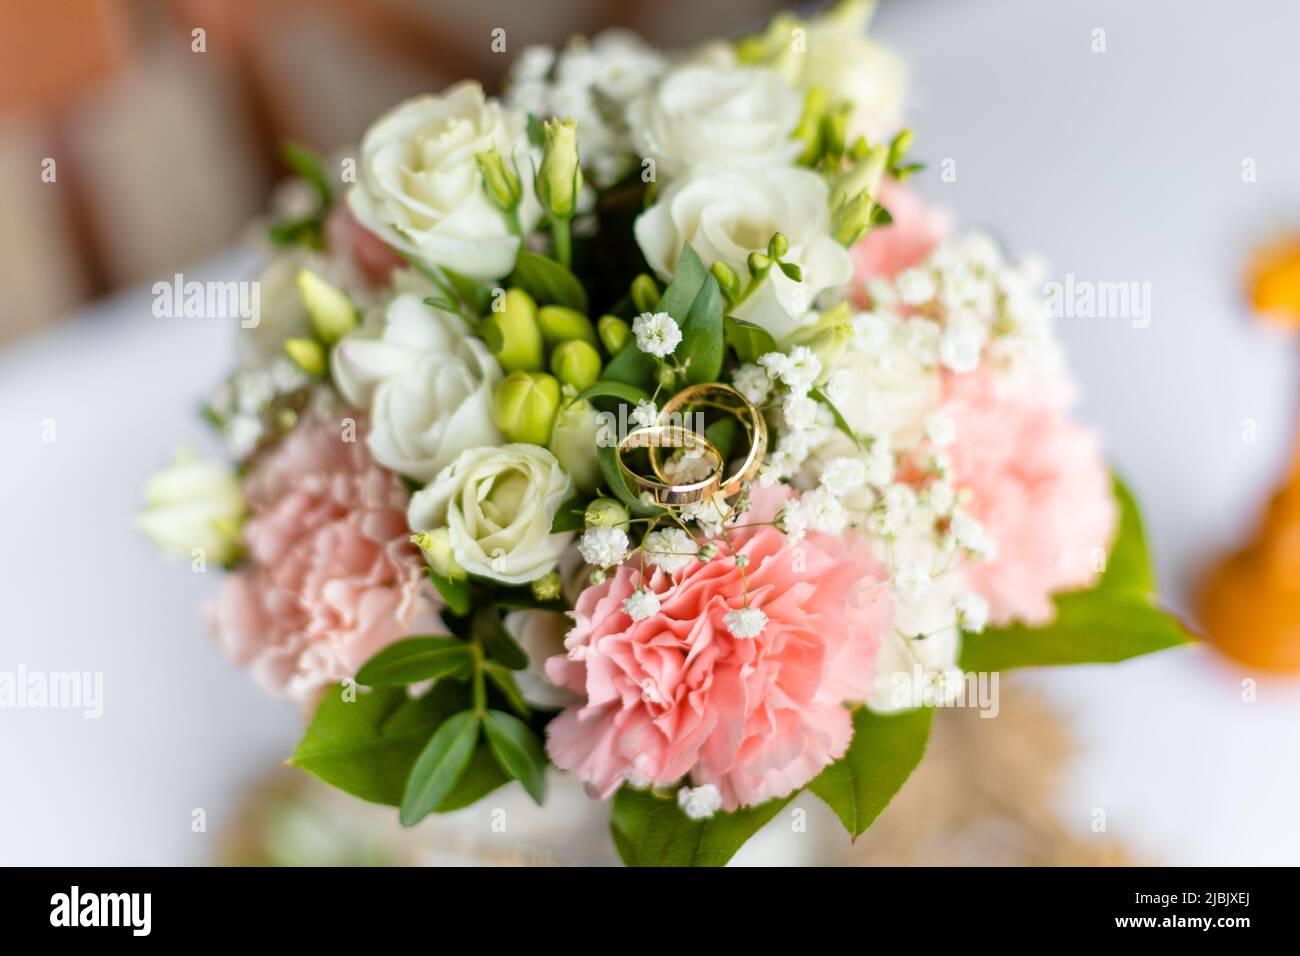 Soft bridal bouquet of fresh flowers and wedding gold rings on celebratory table closeup, blurred background. Elegant attribute and tradition Stock Photo